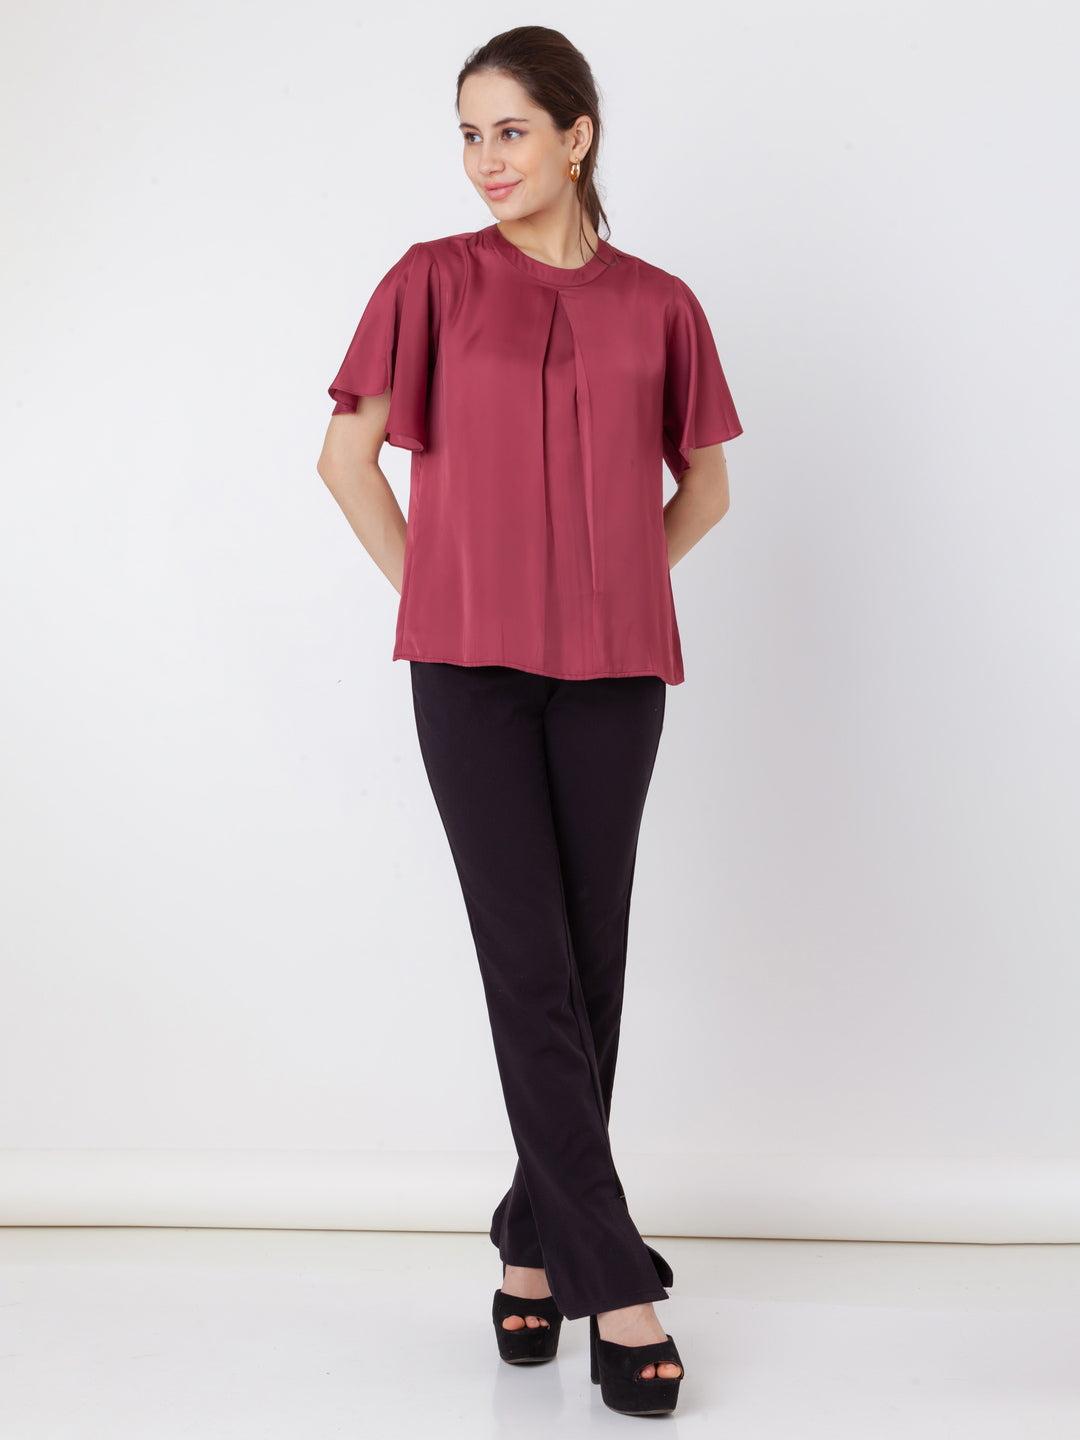 Maroon Solid Regular Top For Women By Zink London